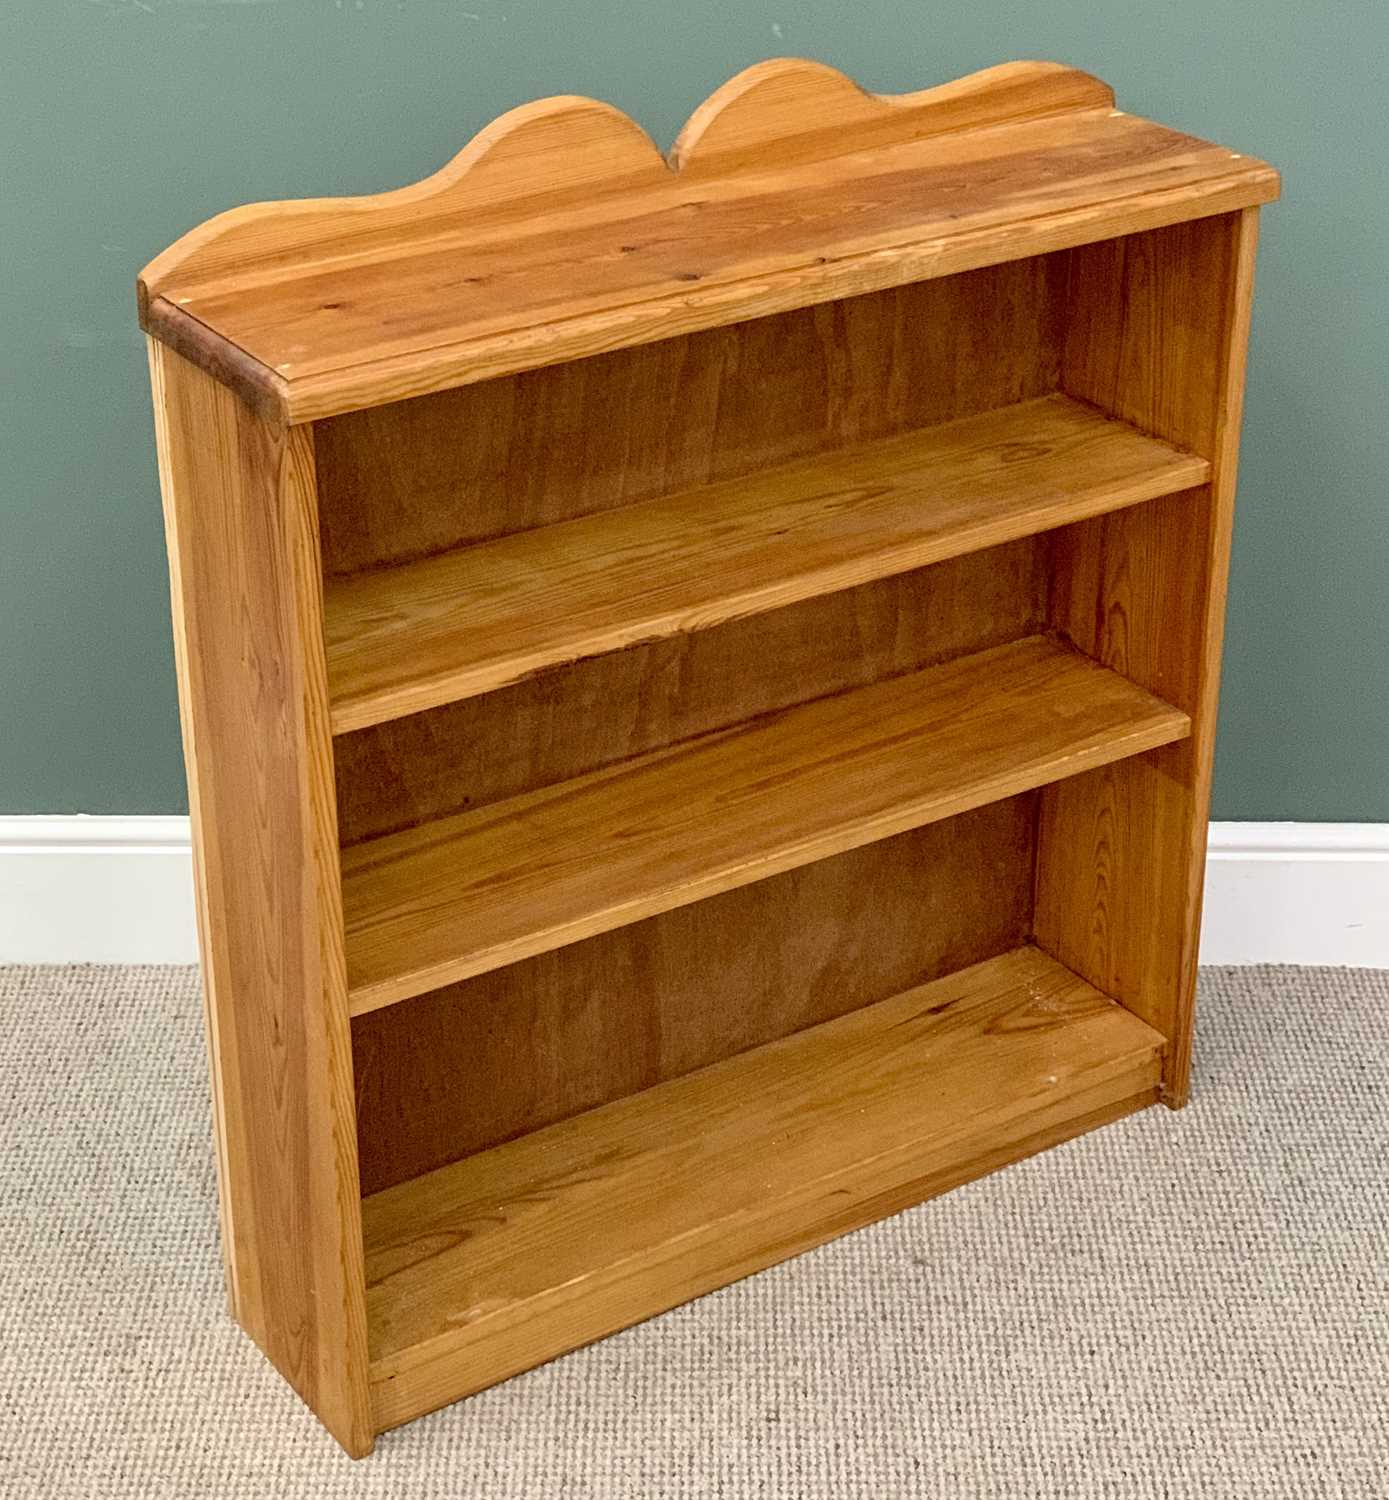 PINE BOOKCASE - modern with three shelves and shaped railback, 104cms H, 92cms W, 24cms D - Image 3 of 3